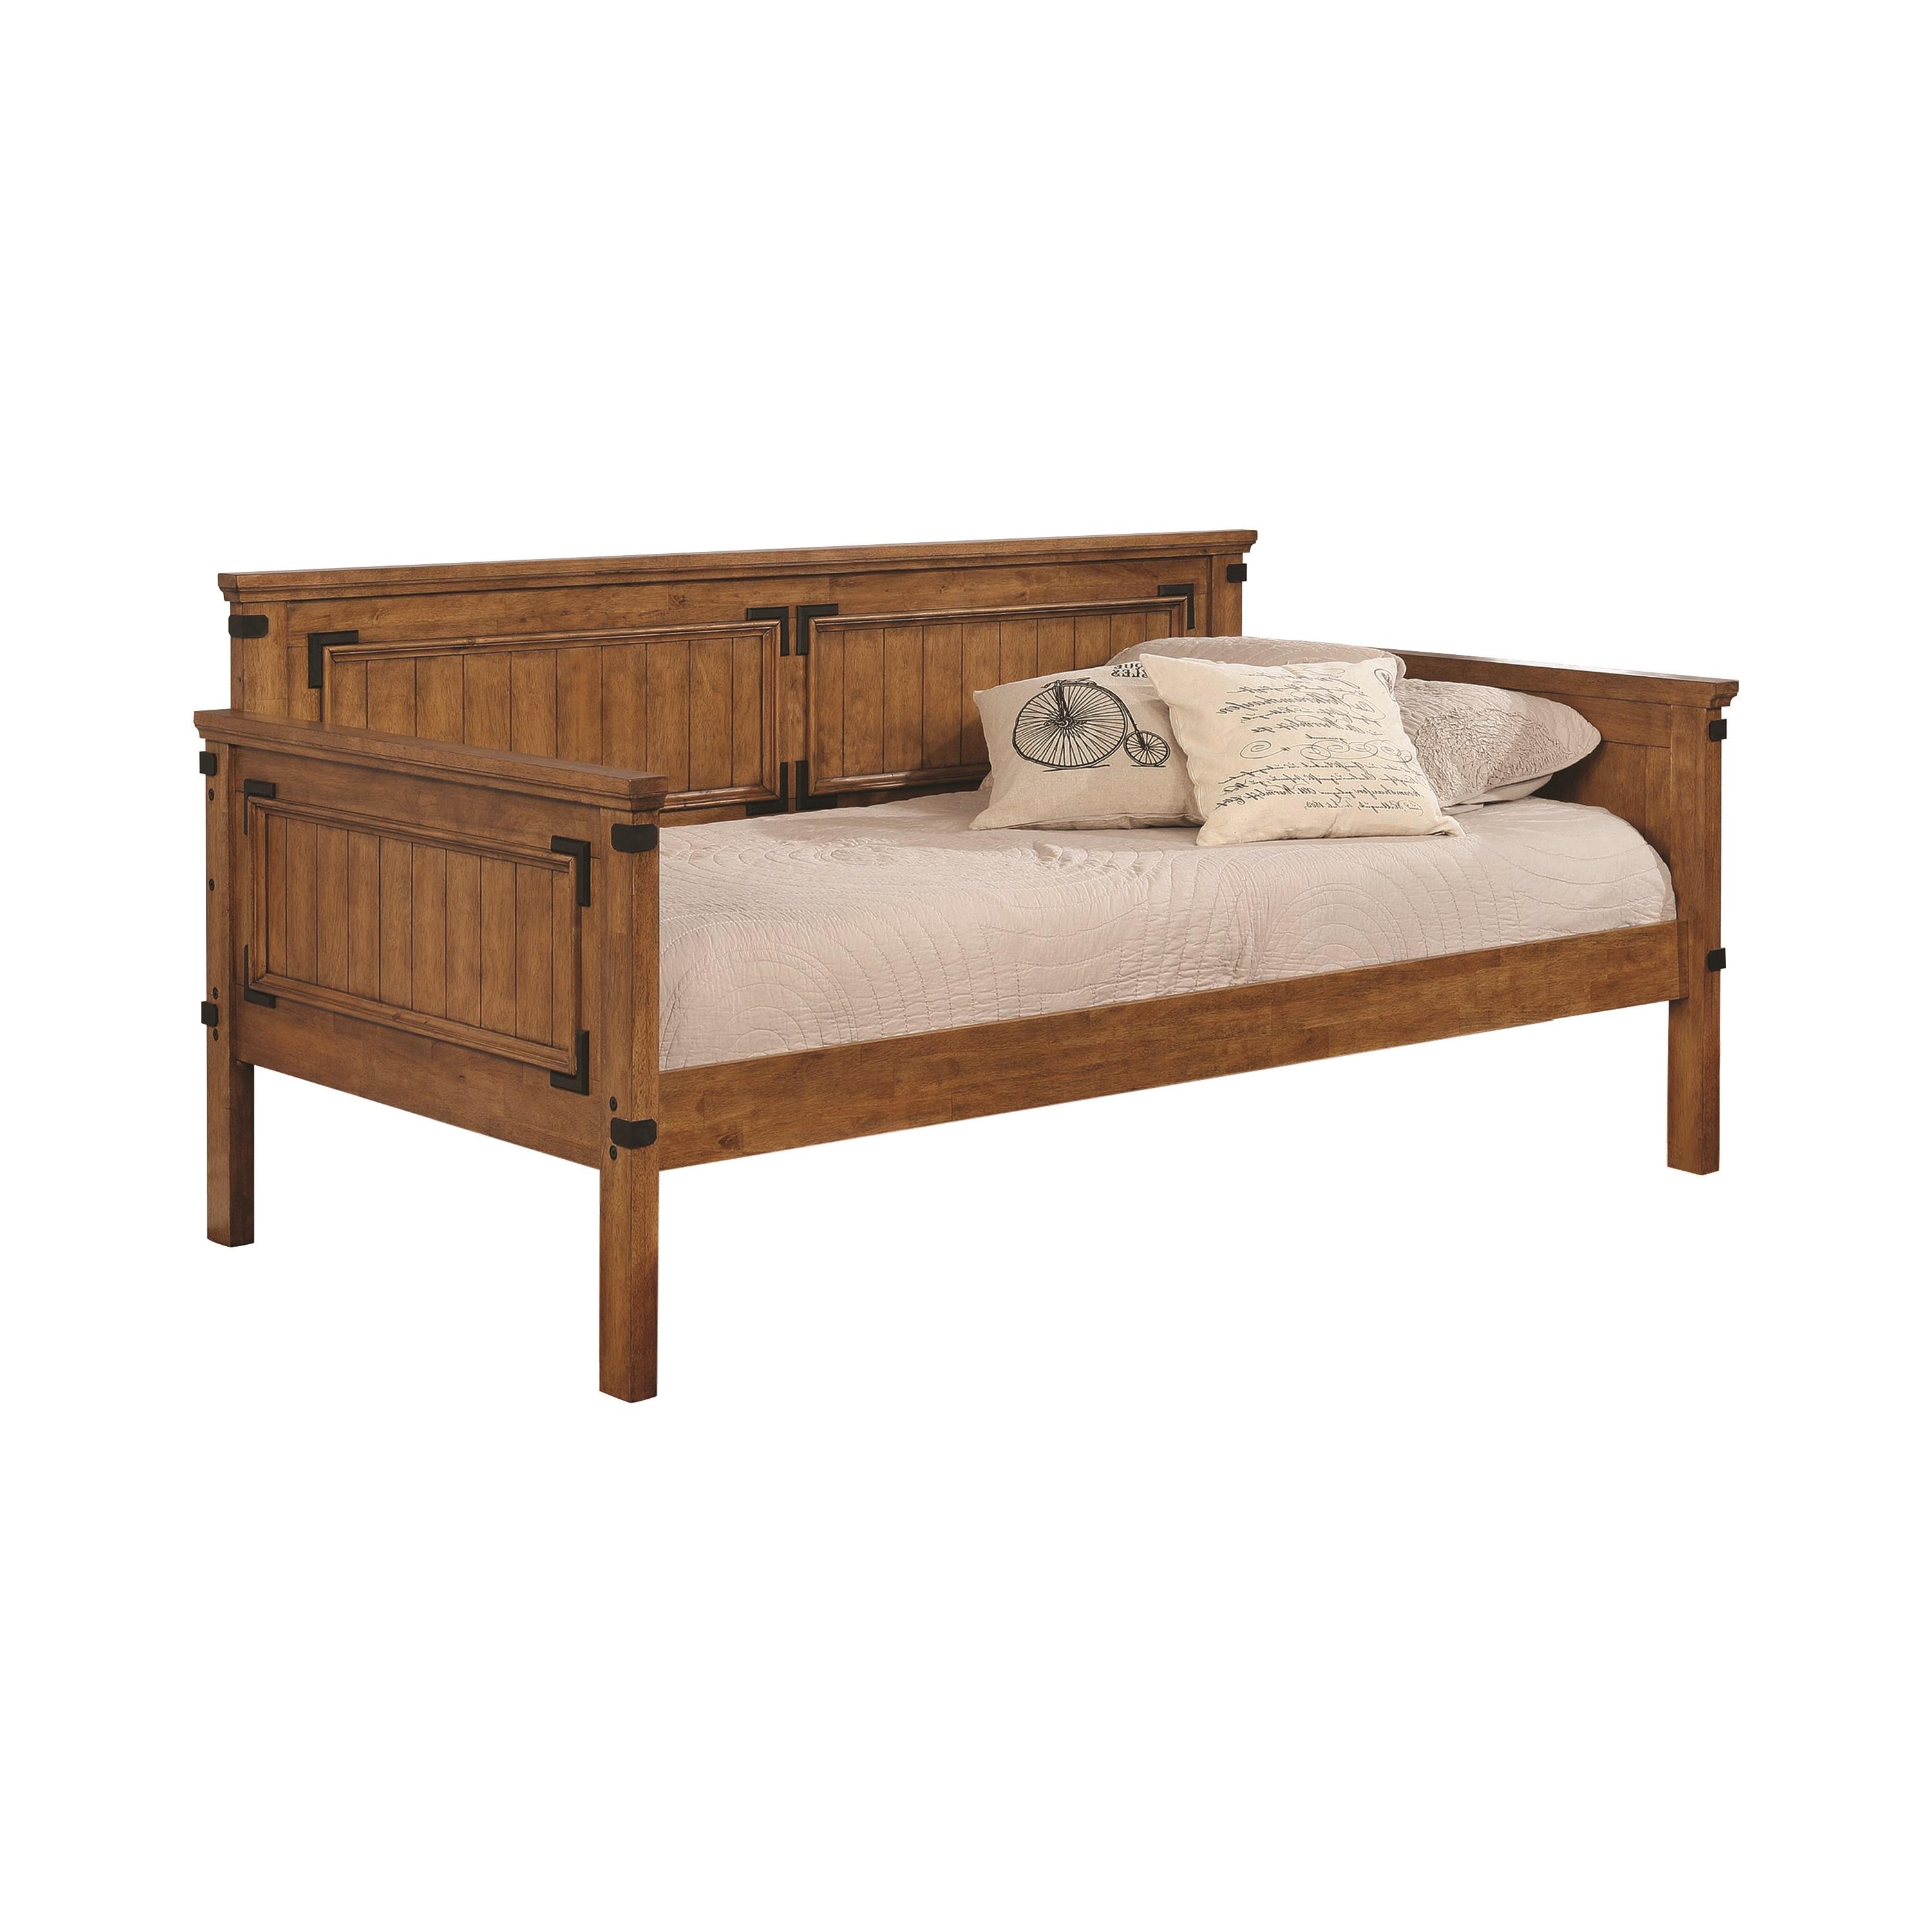 Transitional Daybed 300675 Coronado 300675 in Brown 